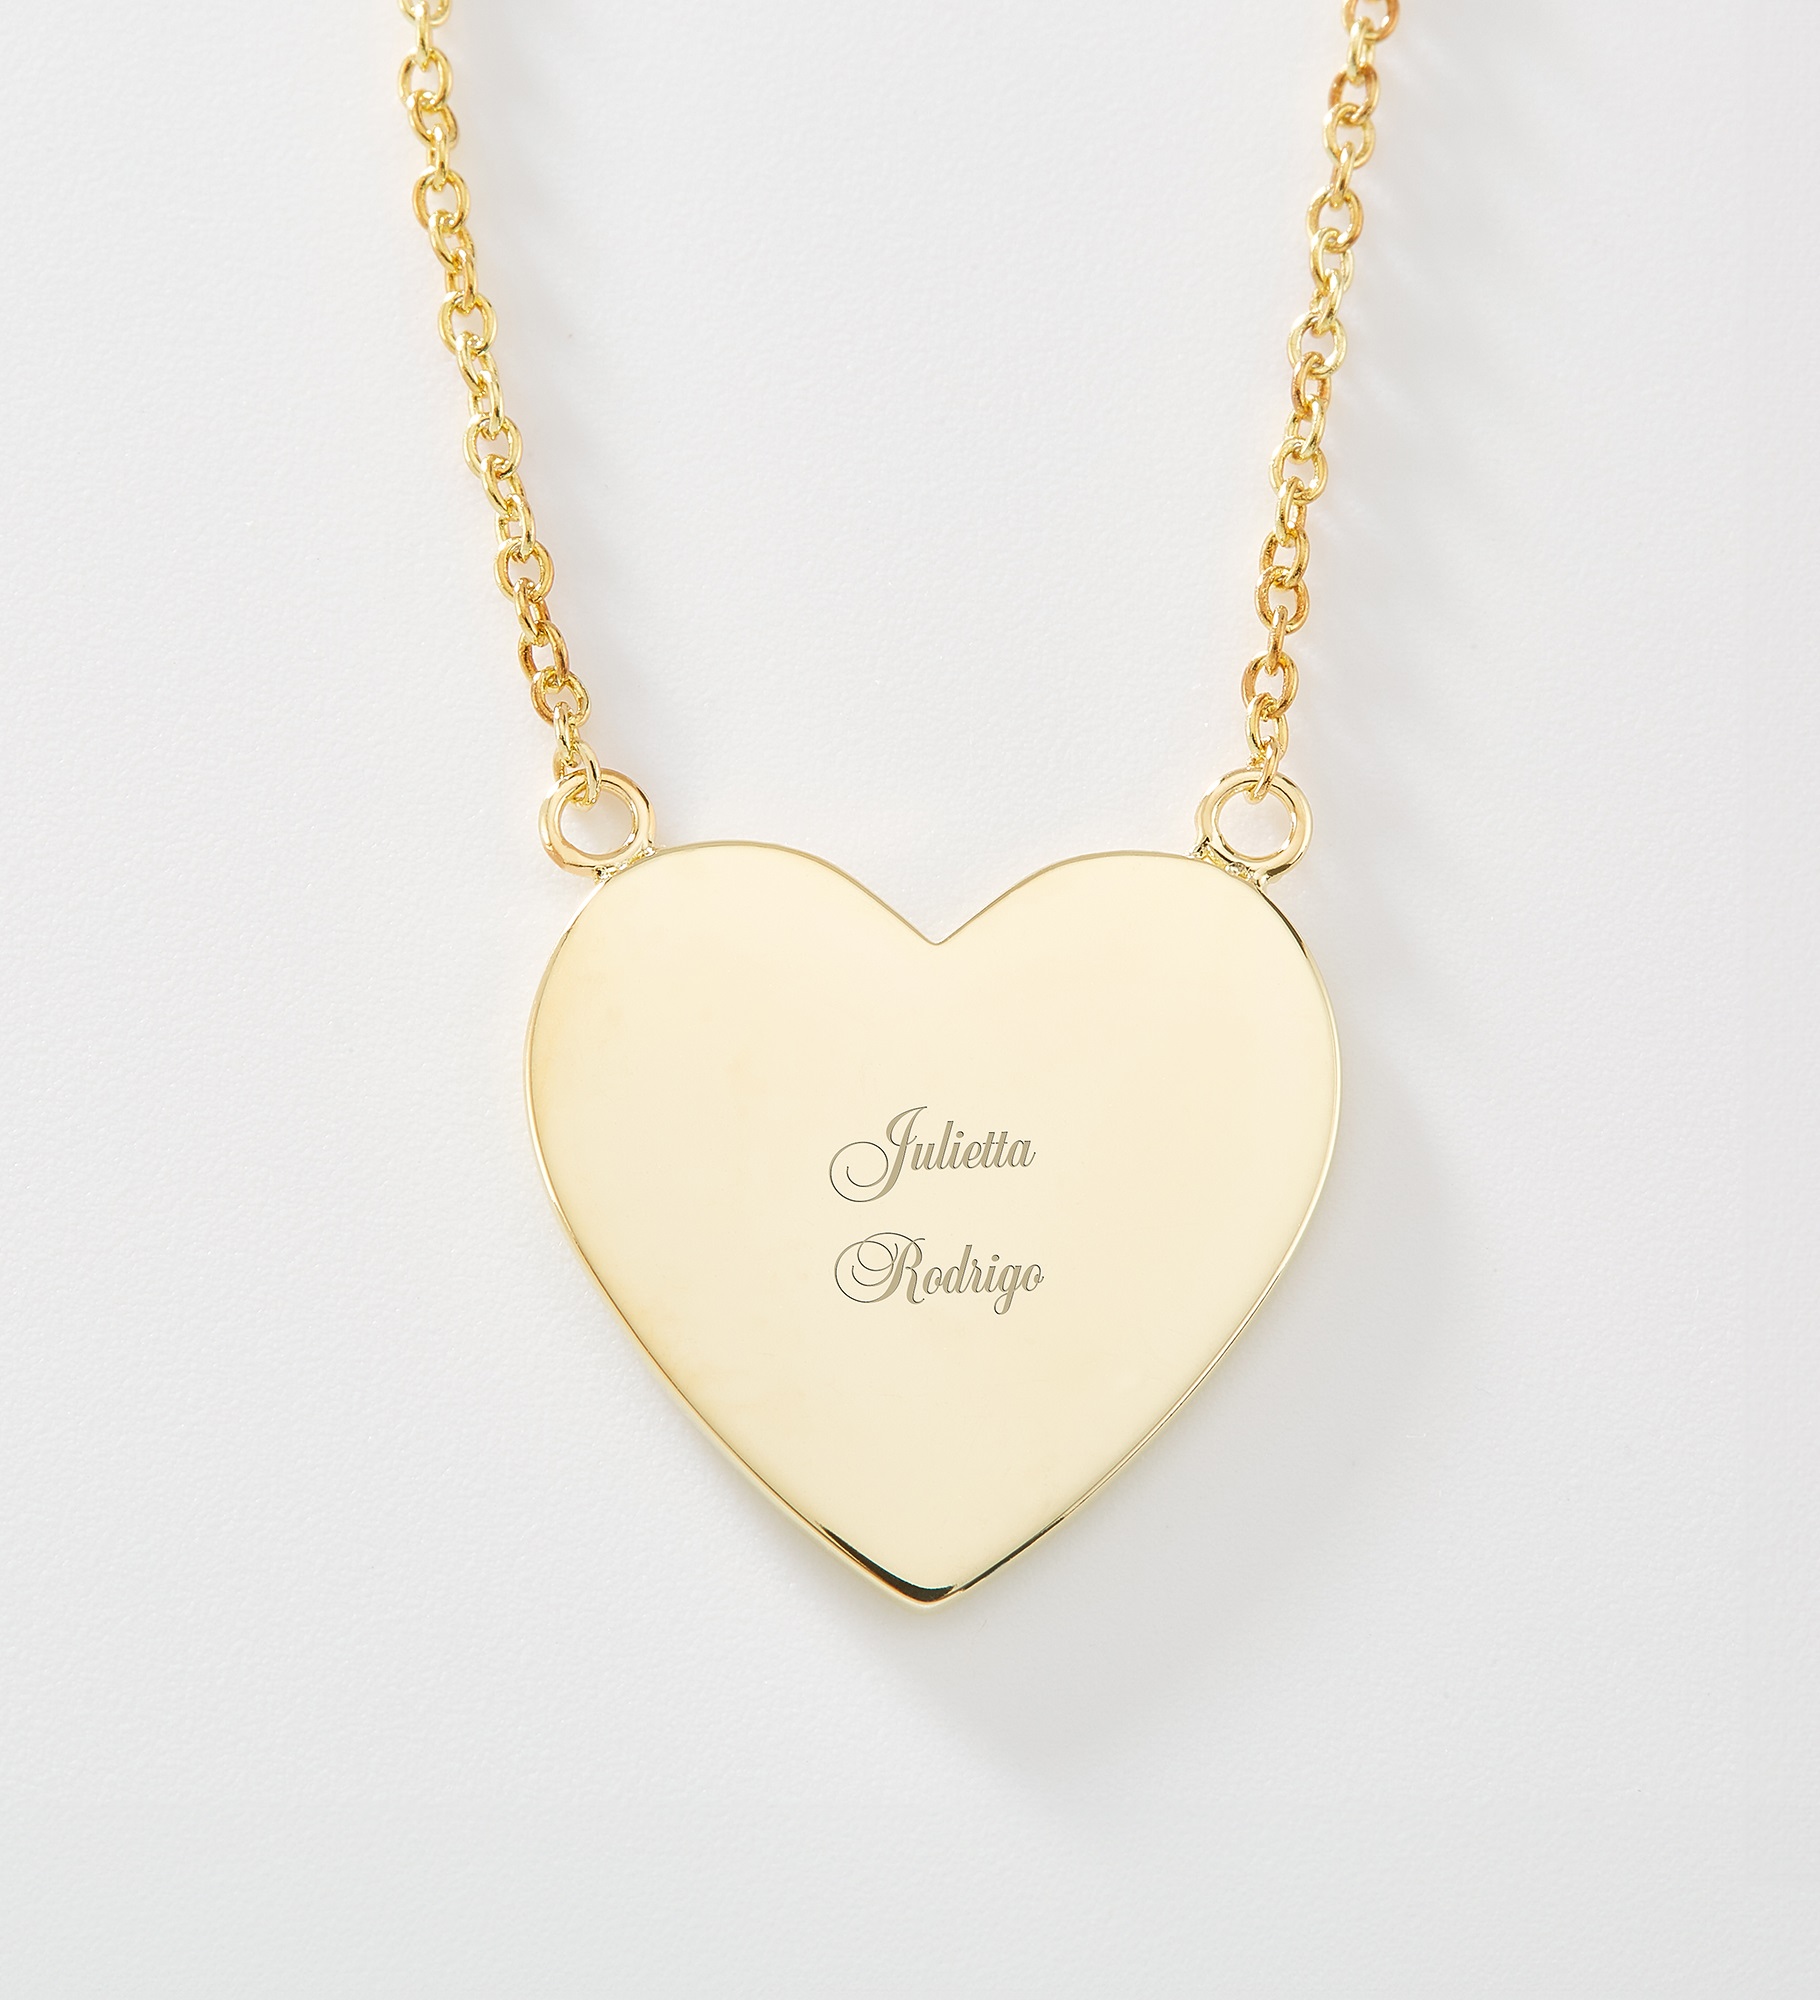  Engraved 14K Gold over Sterling Silver Heart Necklace